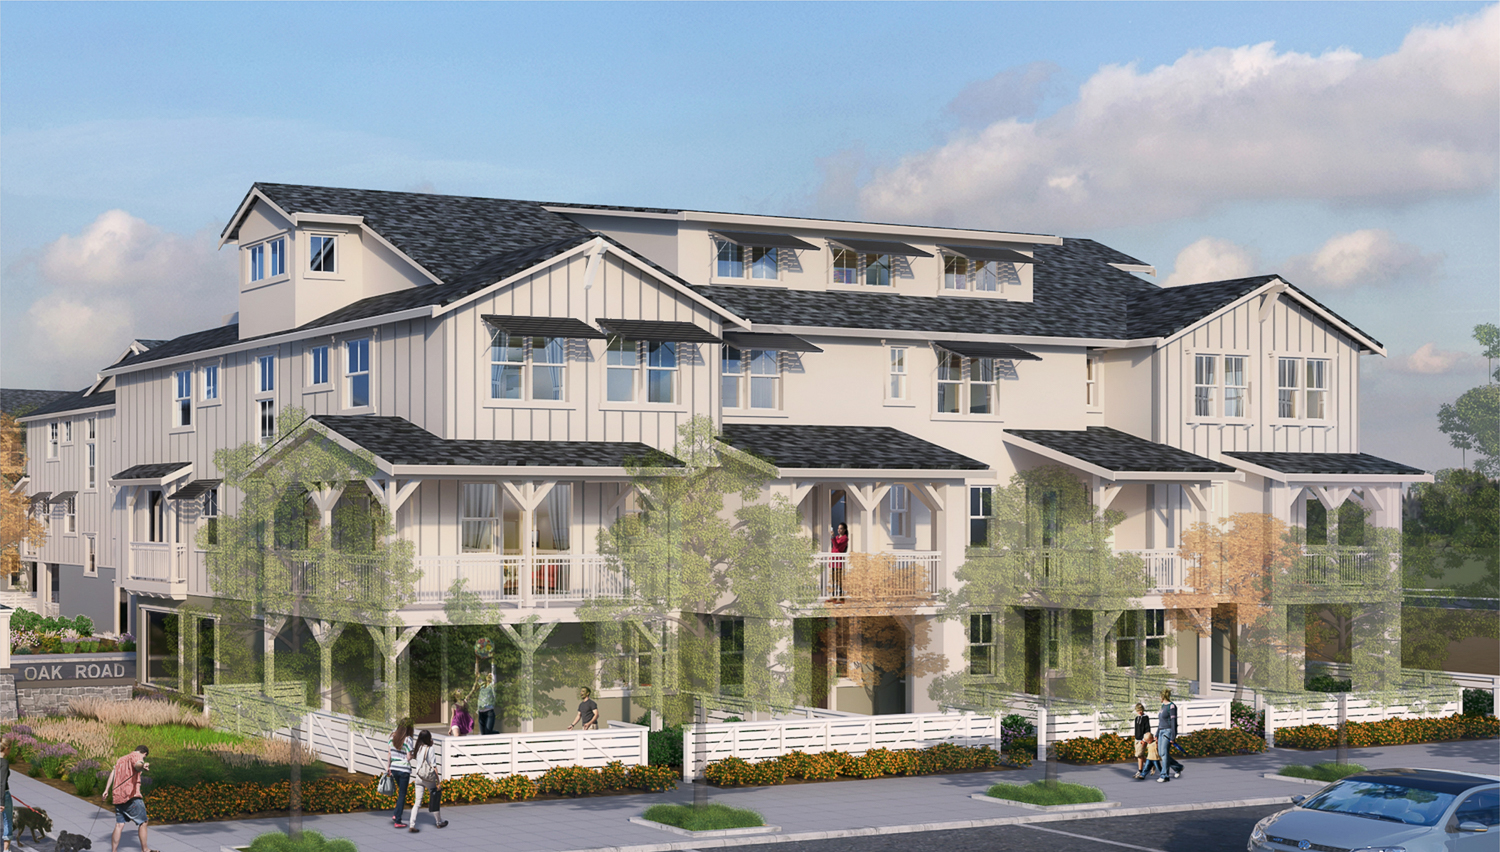 Oak Road 4-unit Townhomes, rendering by Robert Becker for SDG Architects